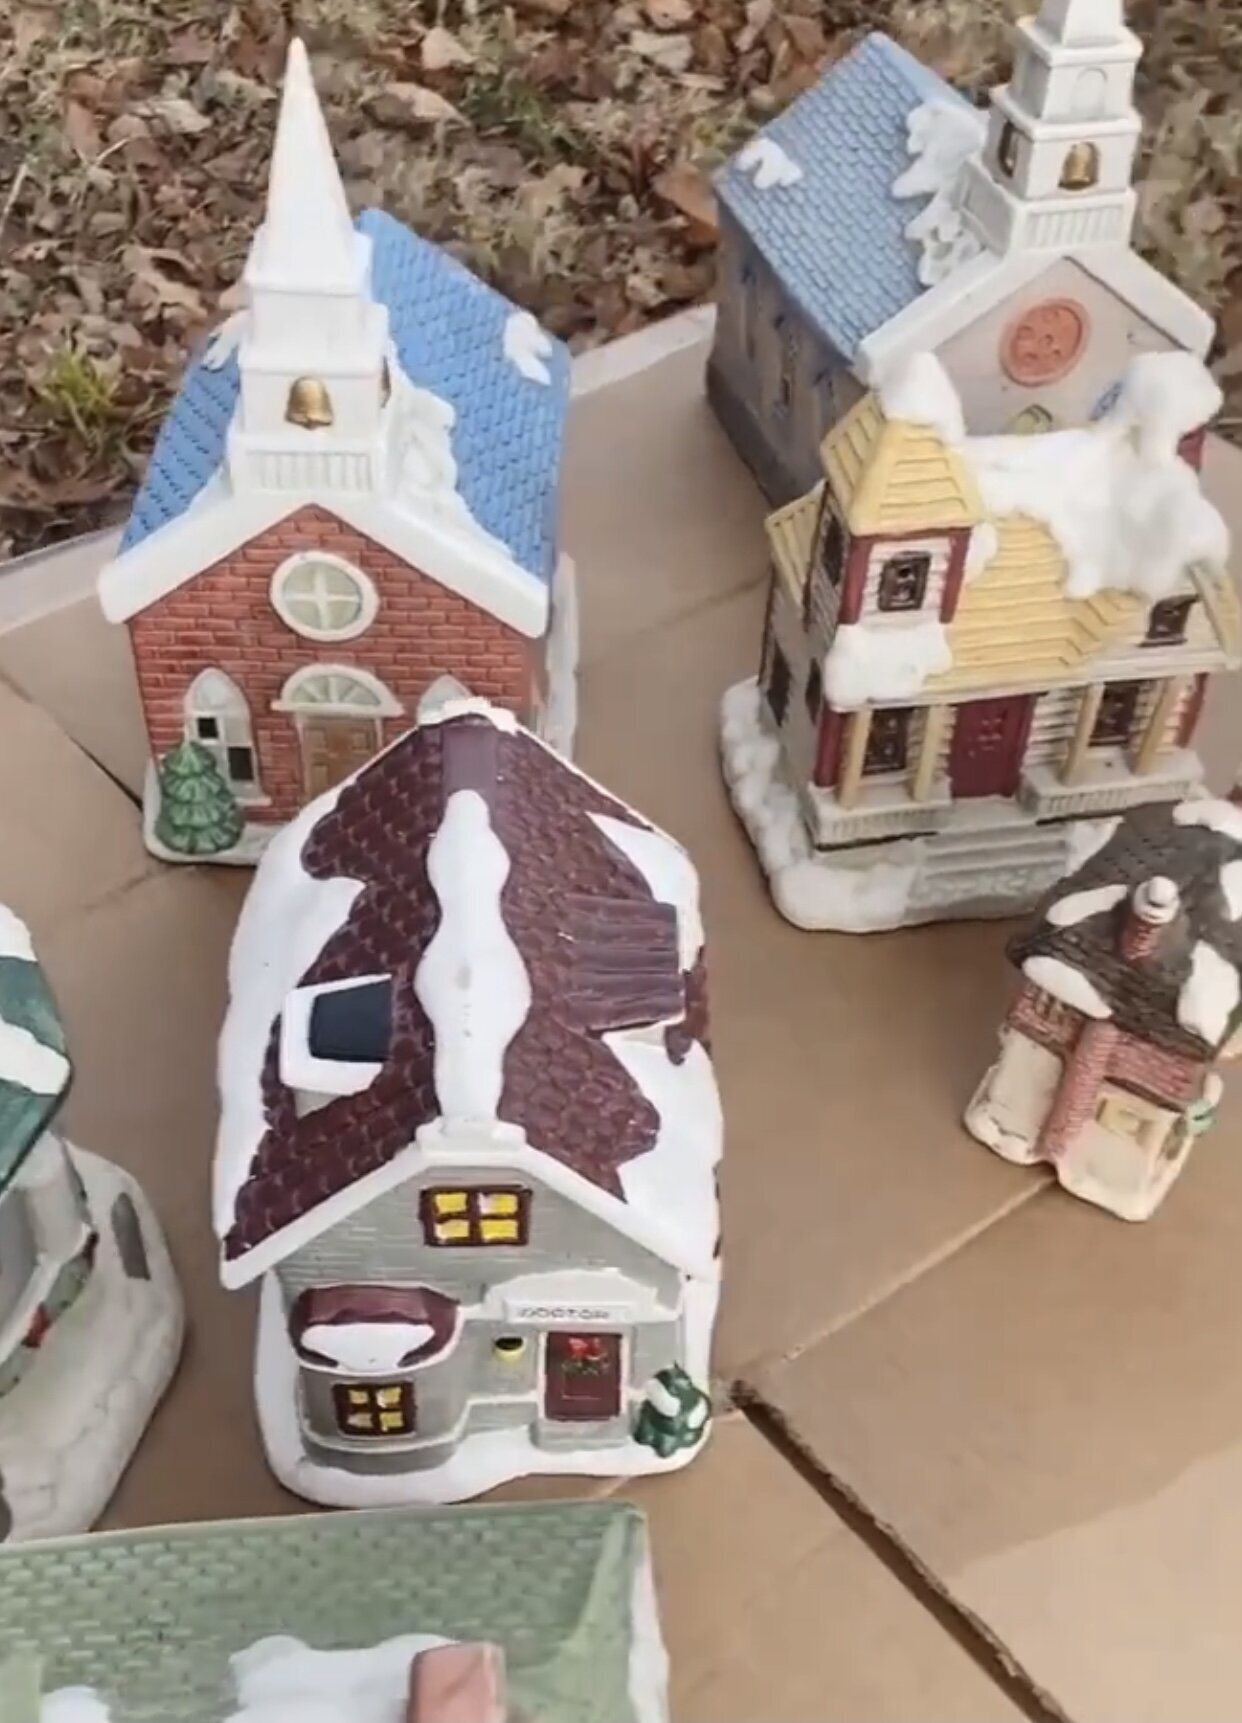 DIY Christmas Village Makeover with Paint